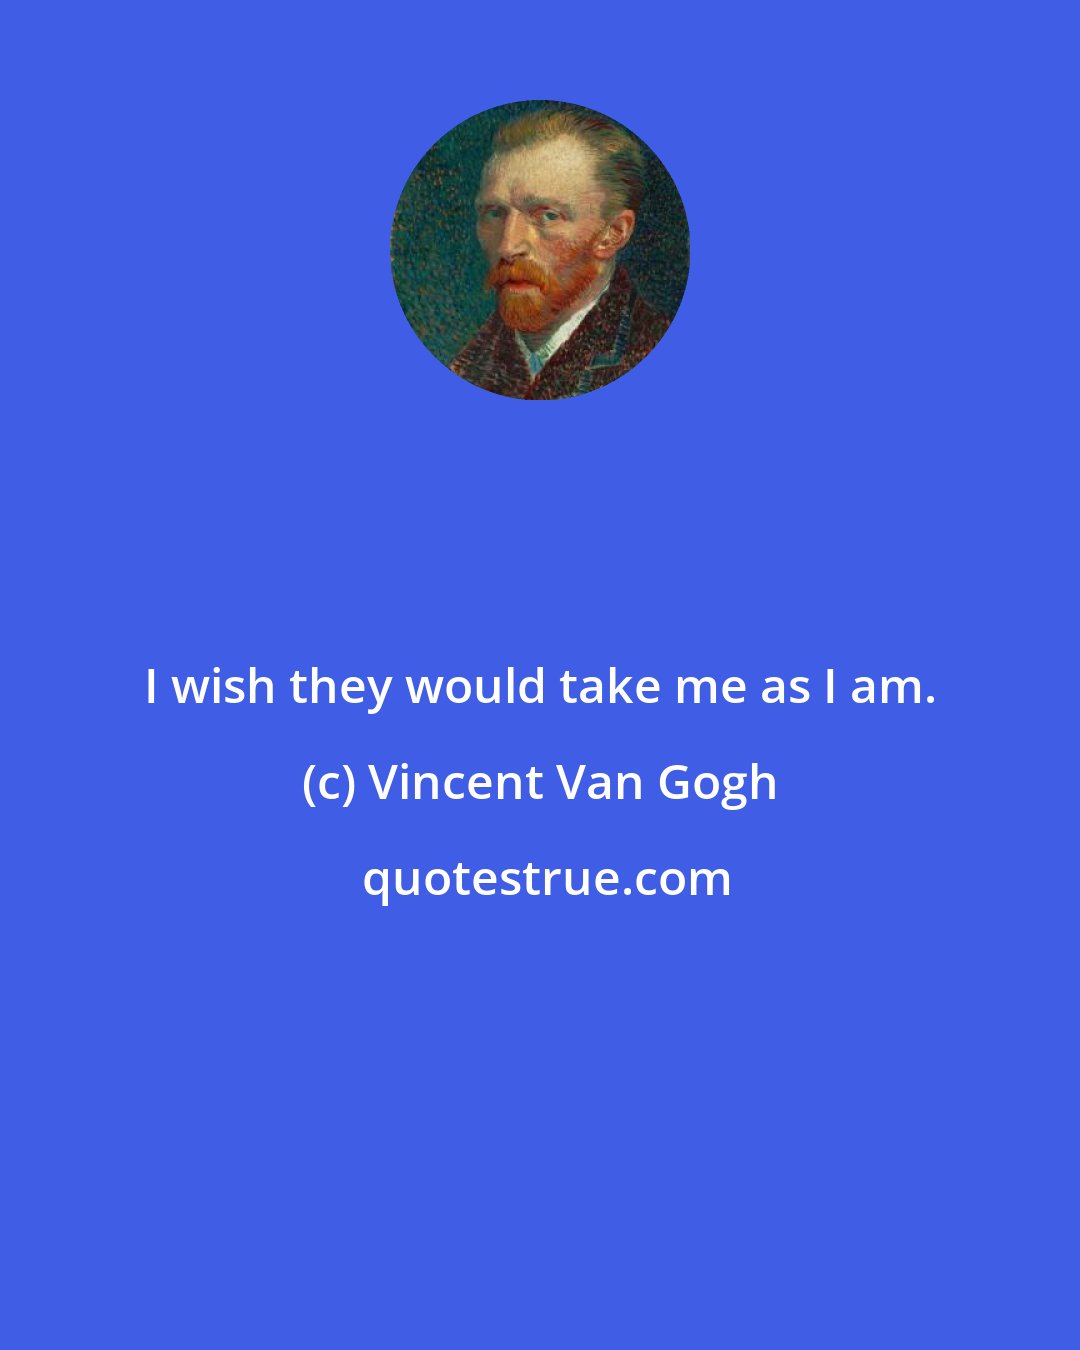 Vincent Van Gogh: I wish they would take me as I am.